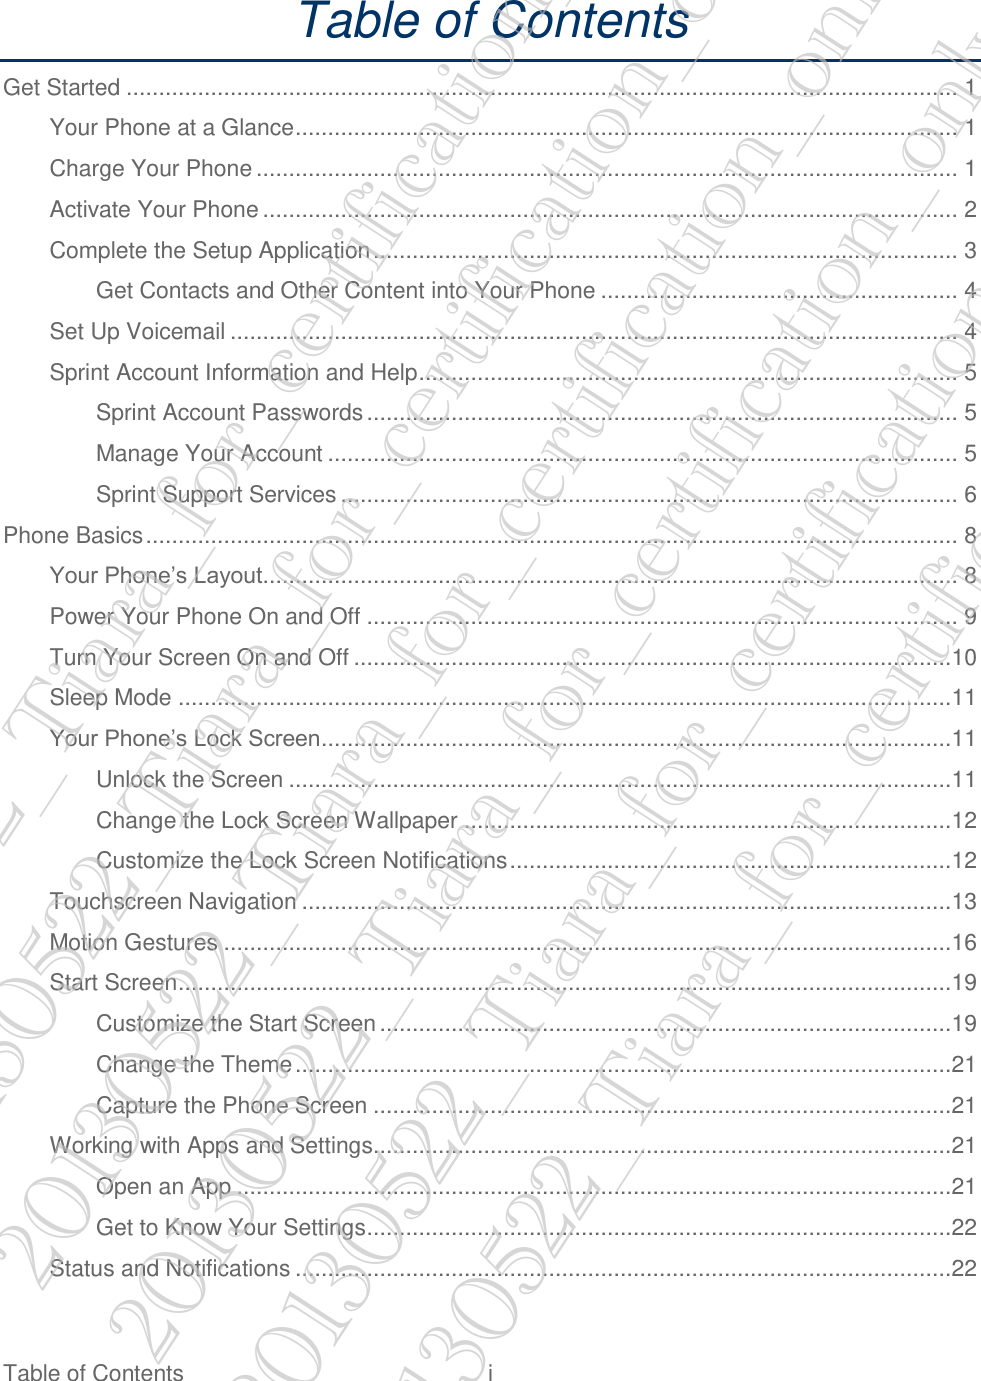  Table of Contents  i   Table of Contents Get Started ................................................................................................................................ 1 Your Phone at a Glance ...................................................................................................... 1 Charge Your Phone ............................................................................................................ 1 Activate Your Phone ........................................................................................................... 2 Complete the Setup Application .......................................................................................... 3 Get Contacts and Other Content into Your Phone ....................................................... 4 Set Up Voicemail ................................................................................................................ 4 Sprint Account Information and Help ................................................................................... 5 Sprint Account Passwords ........................................................................................... 5 Manage Your Account ................................................................................................. 5 Sprint Support Services ............................................................................................... 6 Phone Basics ............................................................................................................................. 8 Your Phone’s Layout ........................................................................................................... 8 Power Your Phone On and Off ........................................................................................... 9 Turn Your Screen On and Off ............................................................................................10 Sleep Mode .......................................................................................................................11 Your Phone’s Lock Screen .................................................................................................11 Unlock the Screen ......................................................................................................11 Change the Lock Screen Wallpaper ...........................................................................12 Customize the Lock Screen Notifications ....................................................................12 Touchscreen Navigation ....................................................................................................13 Motion Gestures ................................................................................................................16 Start Screen .......................................................................................................................19 Customize the Start Screen ........................................................................................19 Change the Theme .....................................................................................................21 Capture the Phone Screen .........................................................................................21 Working with Apps and Settings.........................................................................................21 Open an App ..............................................................................................................21 Get to Know Your Settings ..........................................................................................22 Status and Notifications .....................................................................................................22 20130522_Tiara_for_certification_only 20130522_Tiara_for_certification_only 20130522_Tiara_for_certification_only 20130522_Tiara_for_certification_only 20130522_Tiara_for_certification_only 20130522_Tiara_for_certification_only